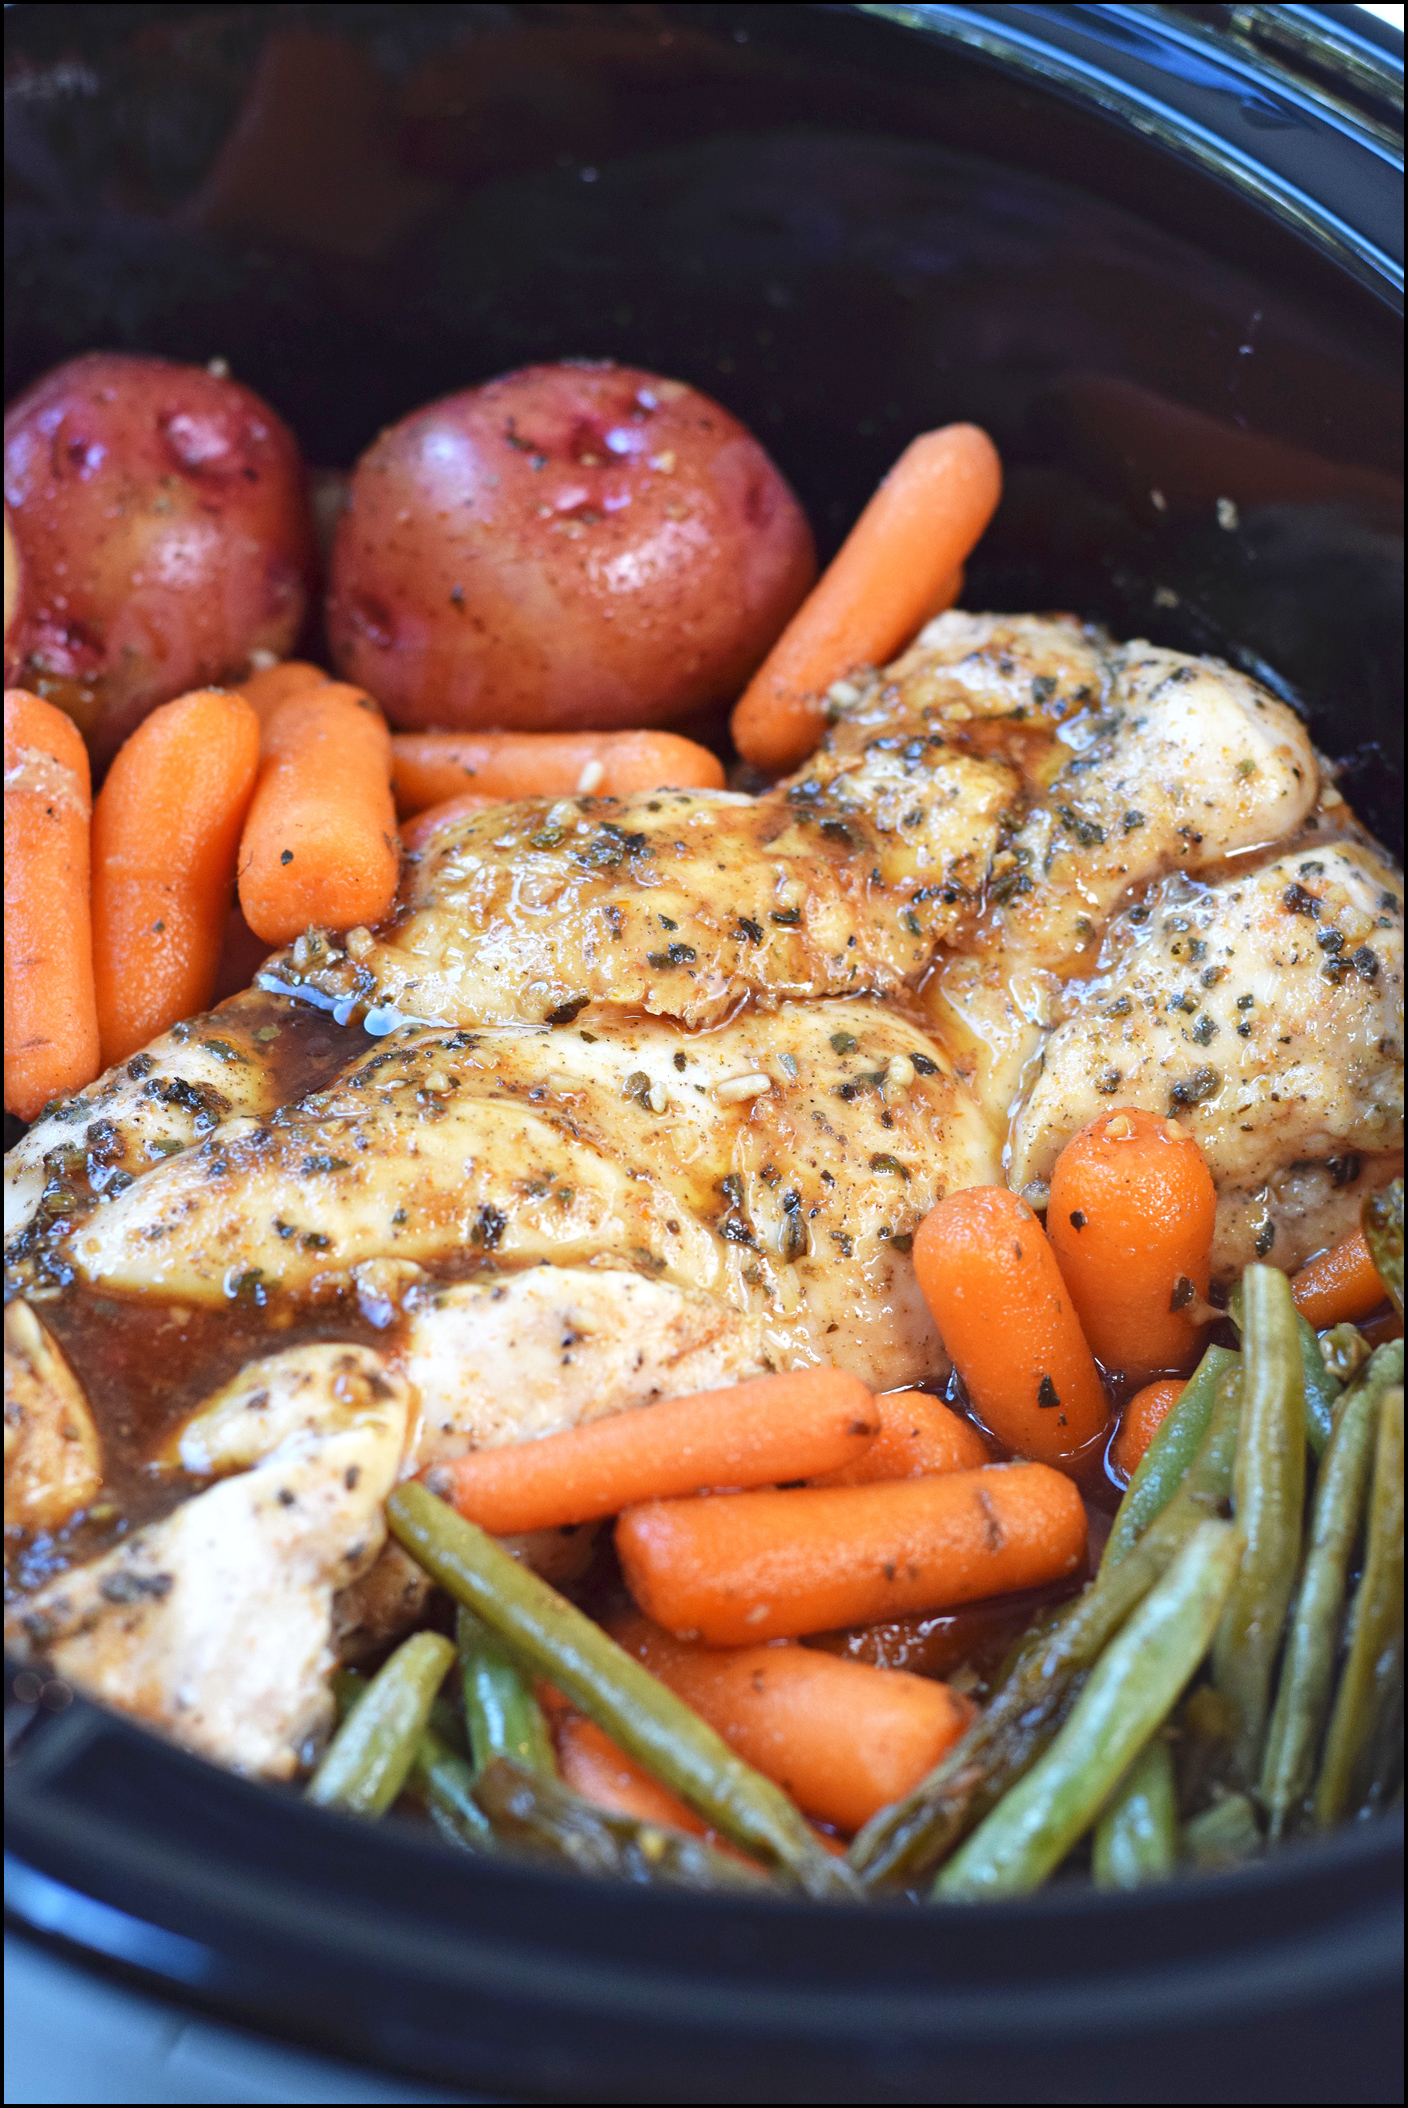 Chicken And Vegetables In Crock Pot